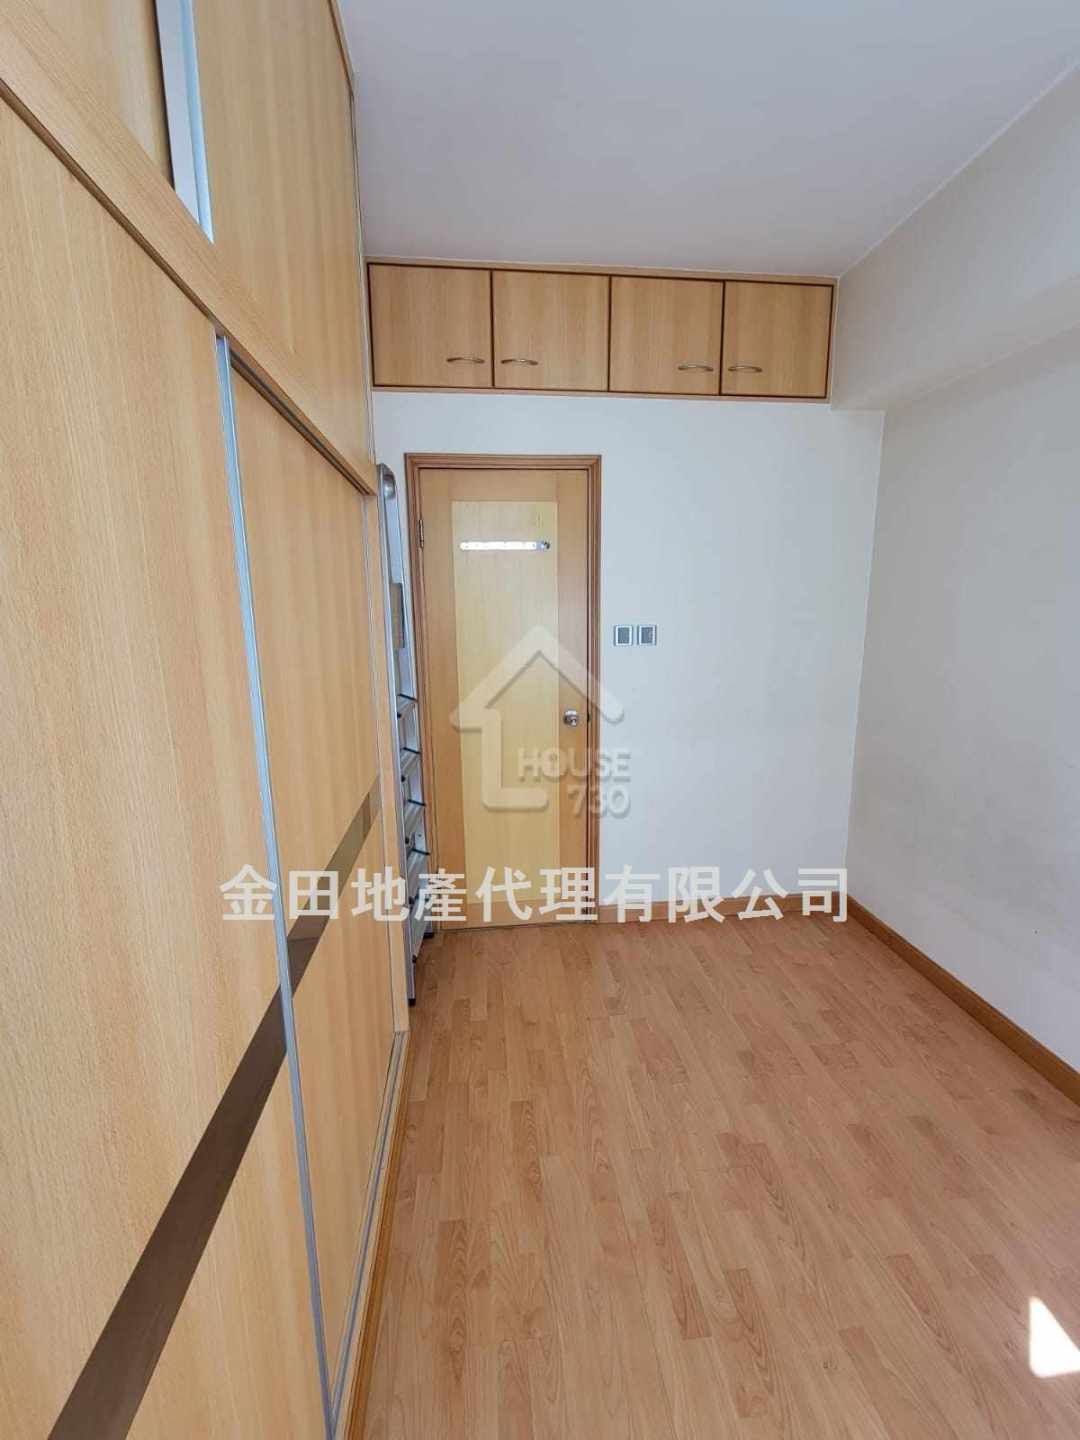 Wan Chai KWONG SANG HONG BUILDING Middle Floor Bedroom 1 House730-6282601